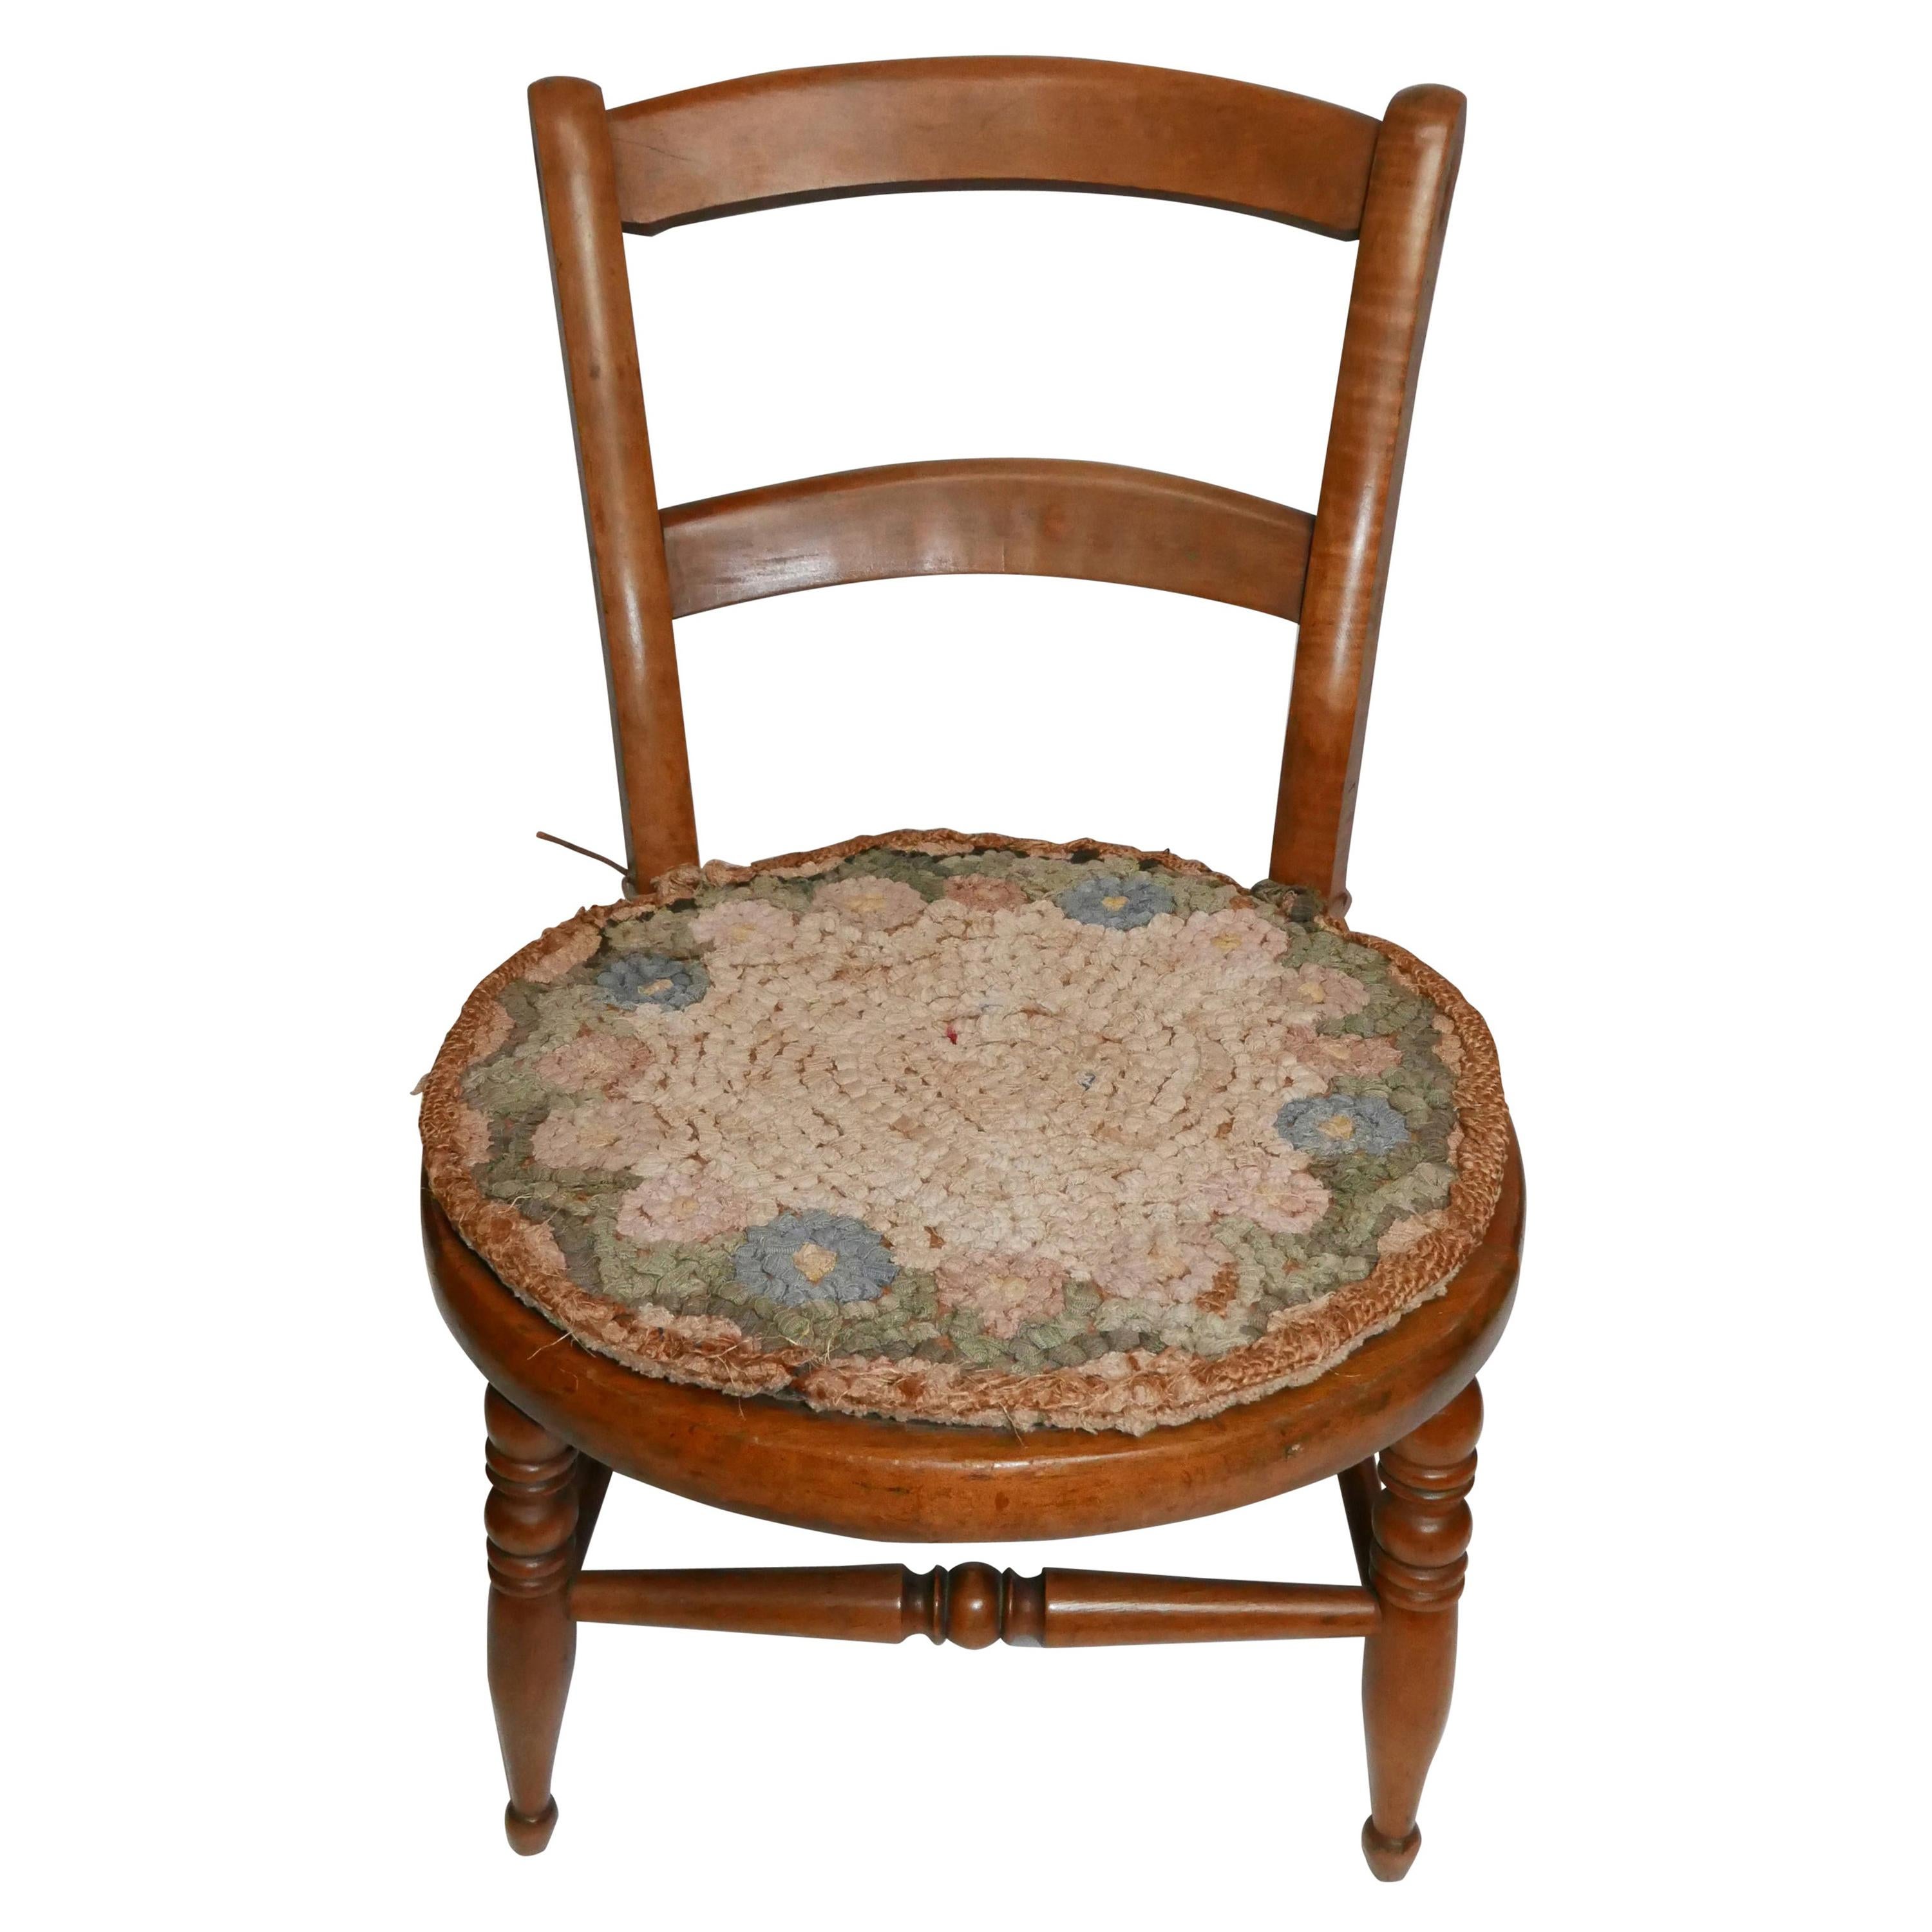 American Curly Maple Child's Chair, circa 1870